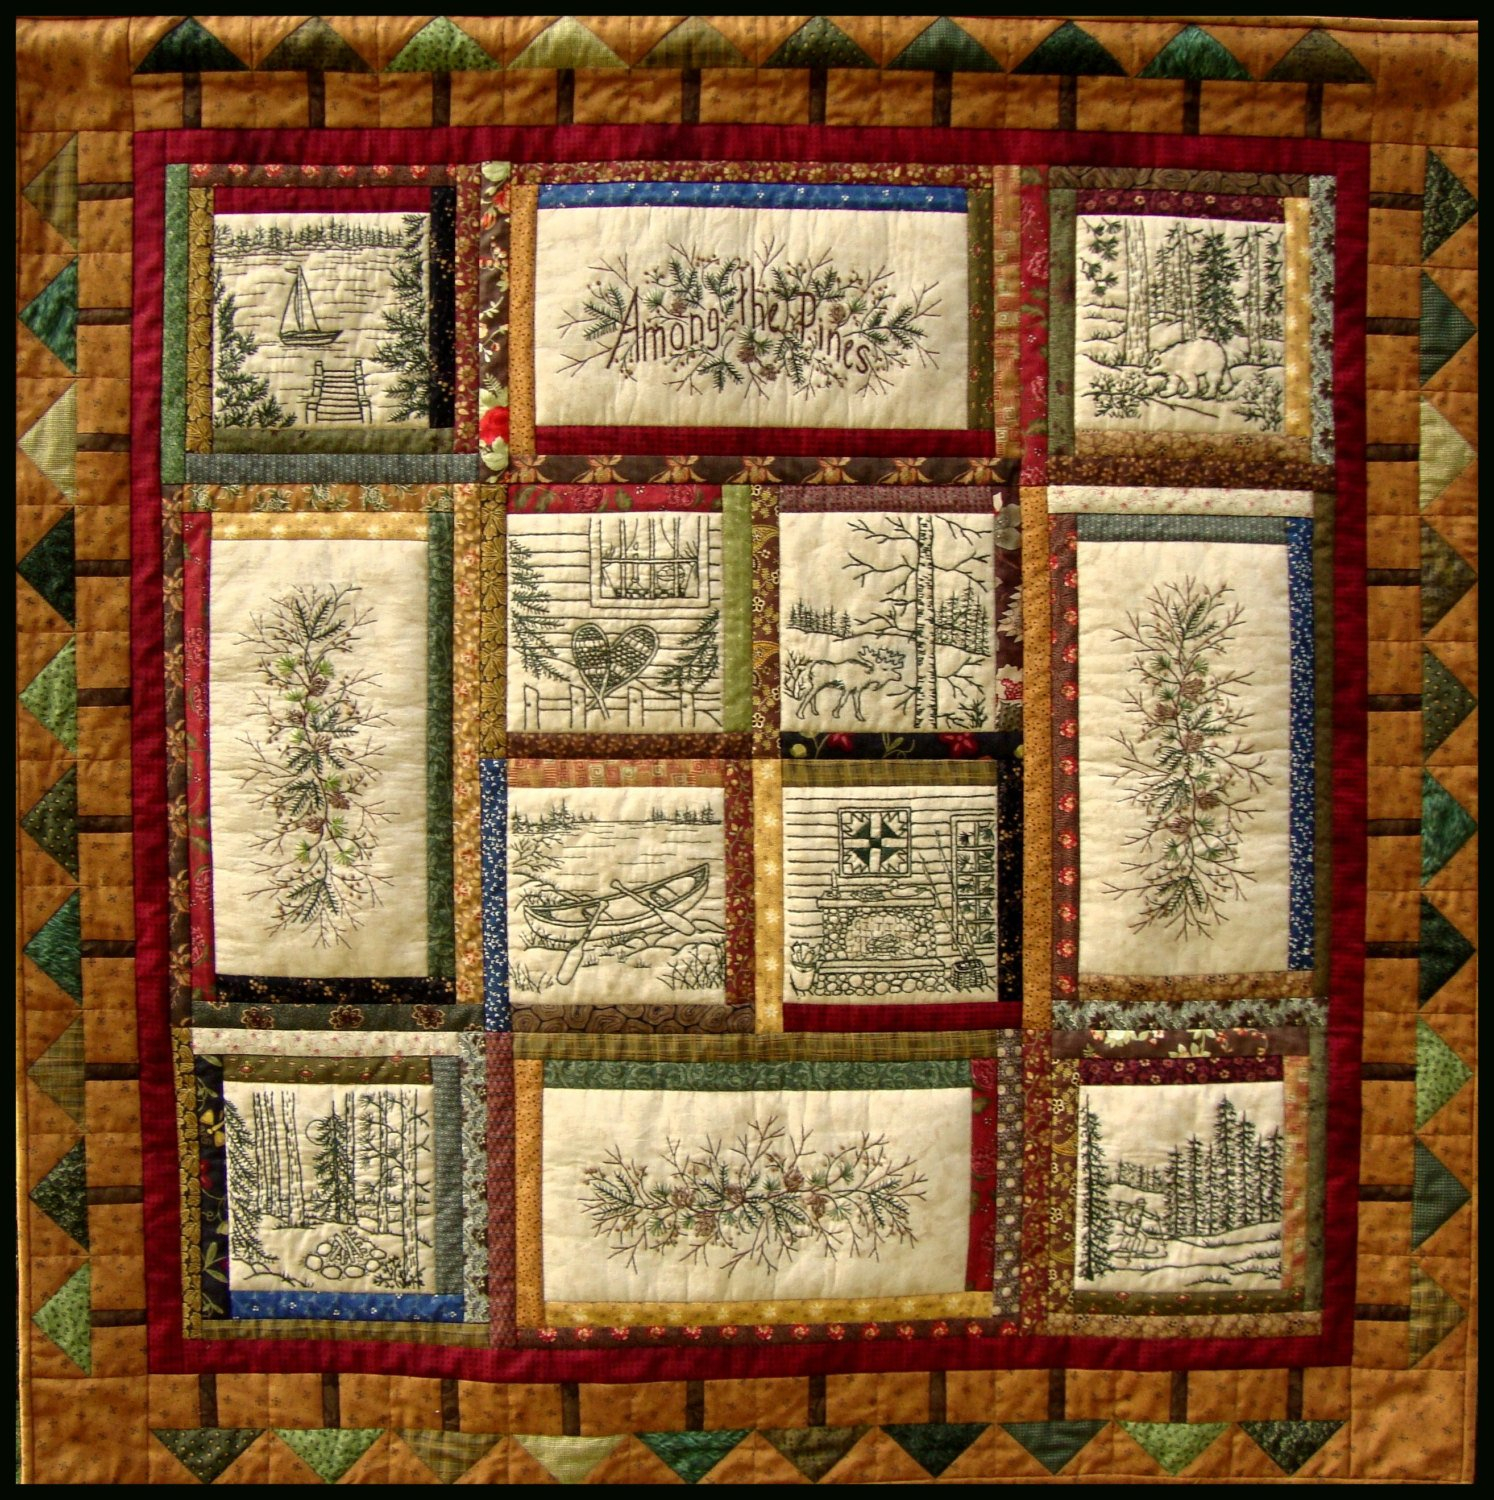 Hand Embroidery Quilt Patterns Among The Pines Wellington Designs